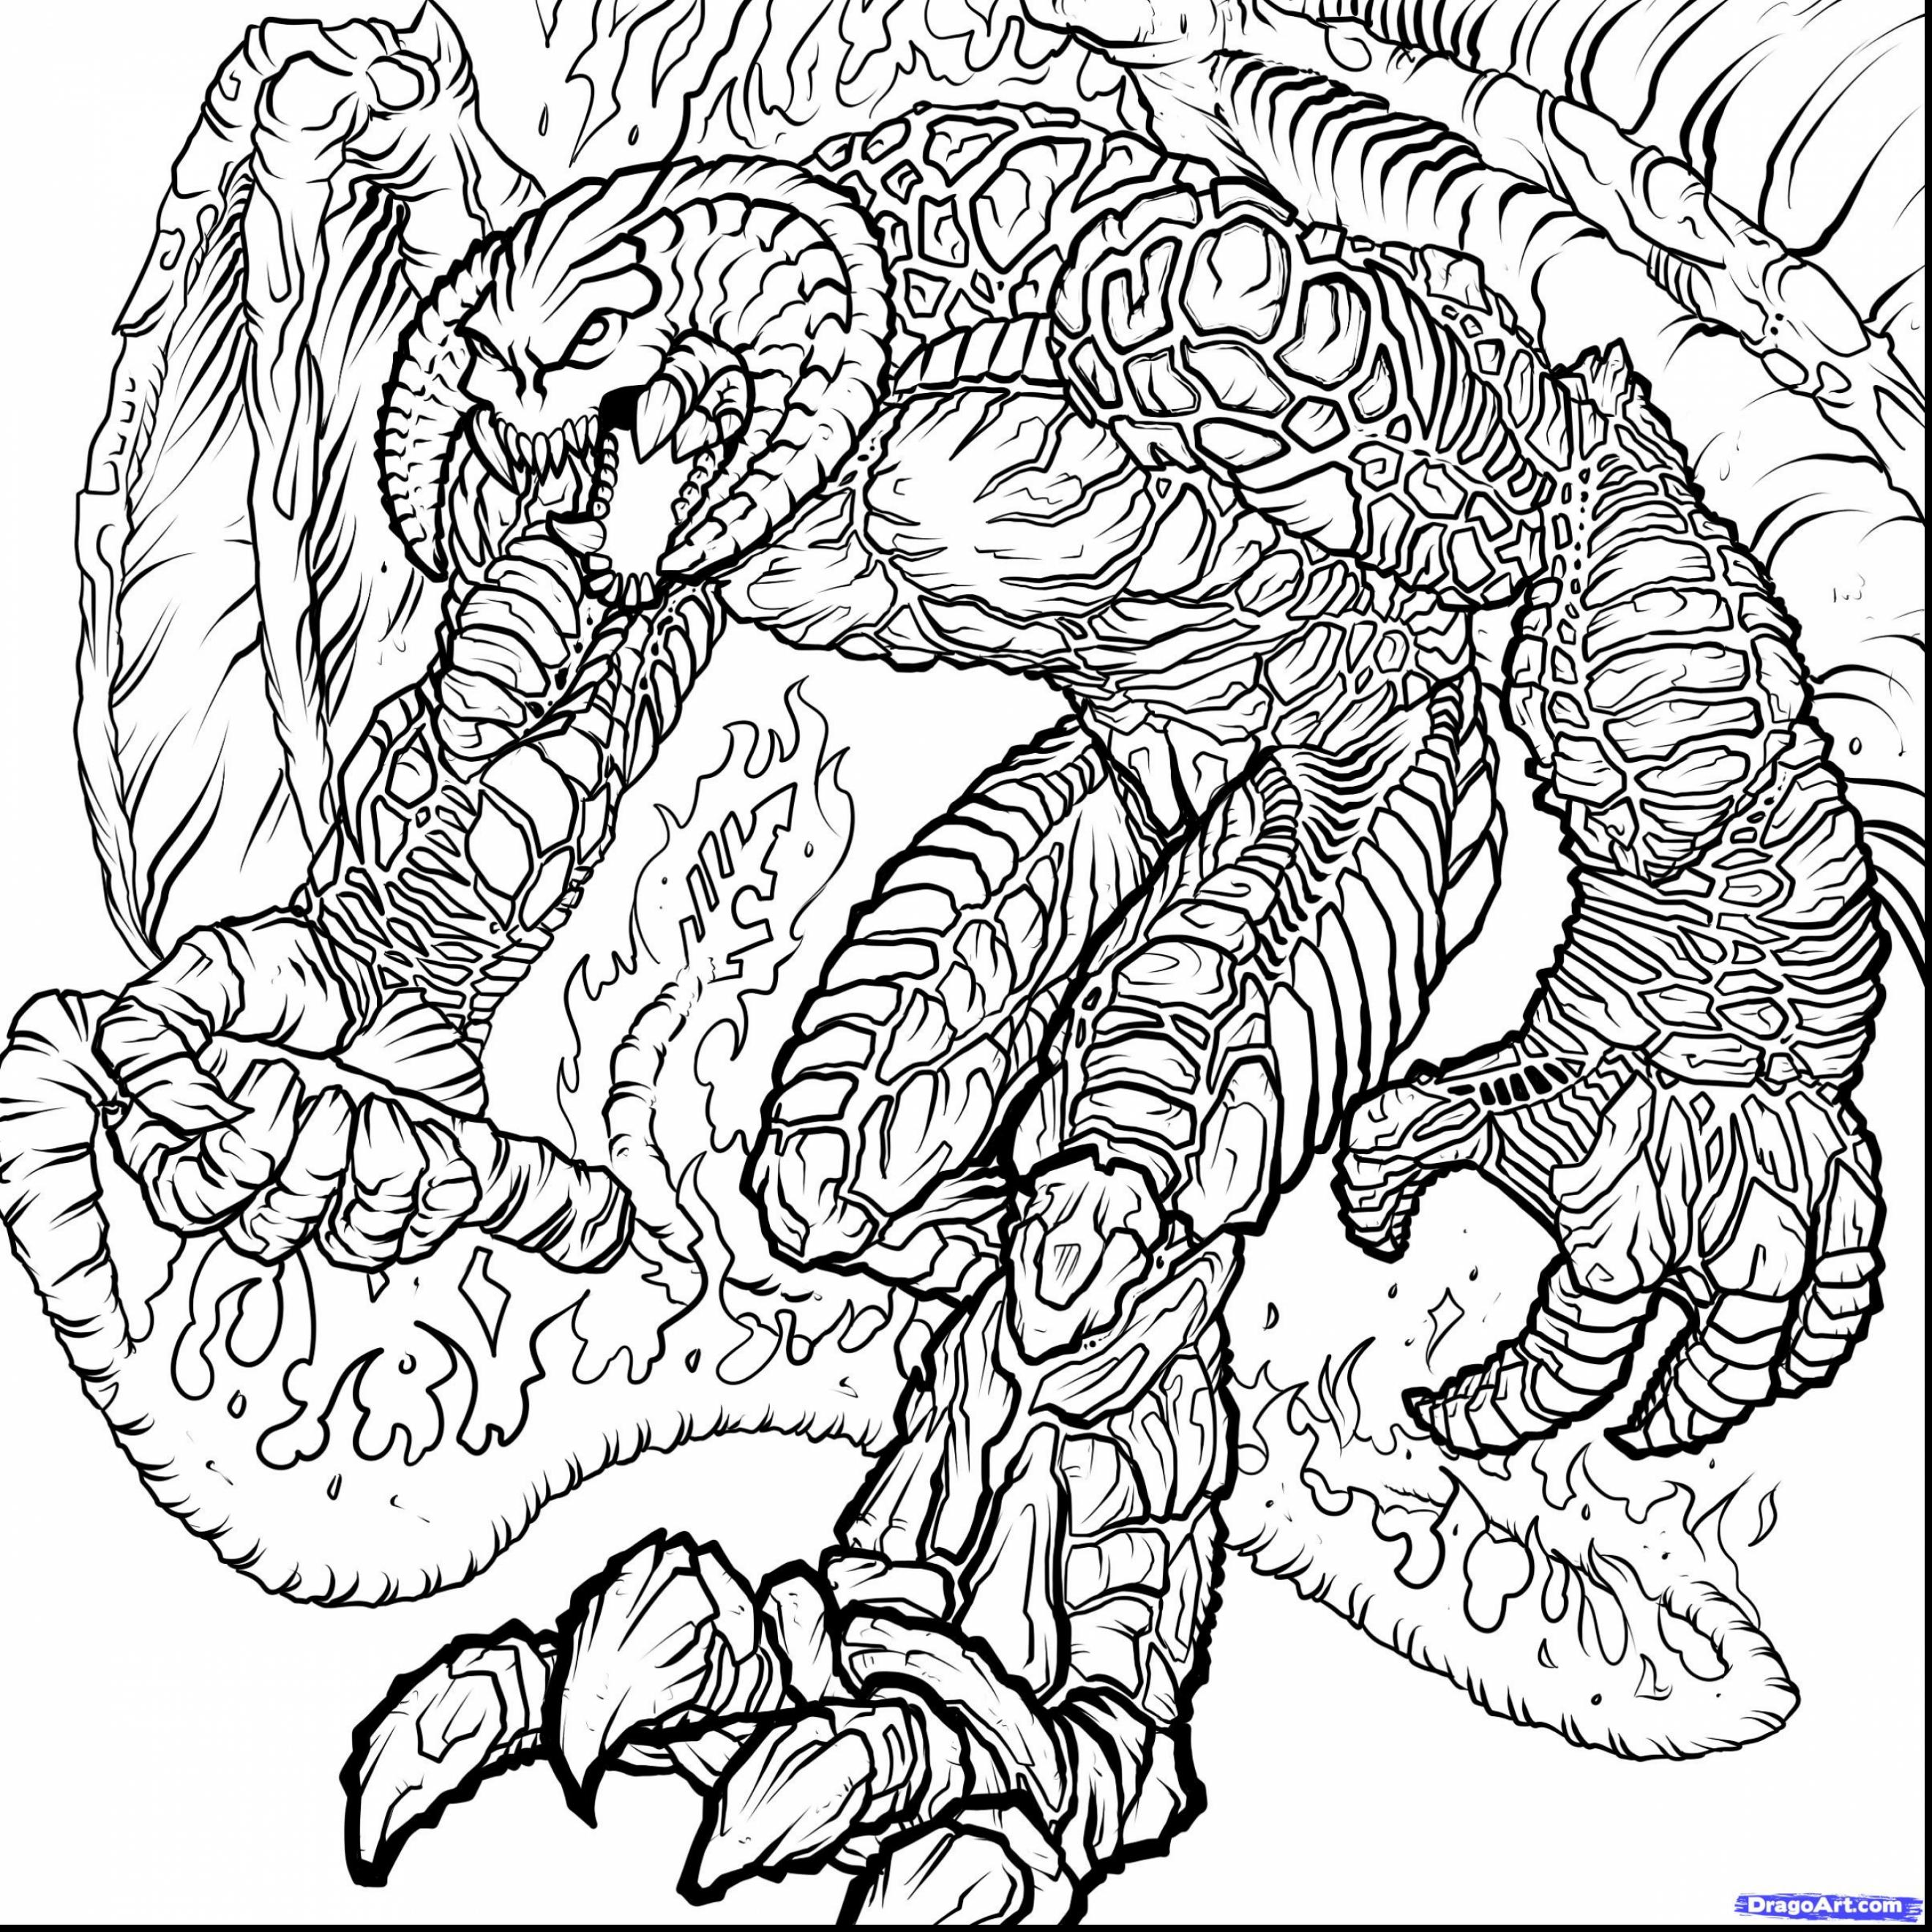 Lego Dragon Coloring Pages at GetColorings.com | Free ...